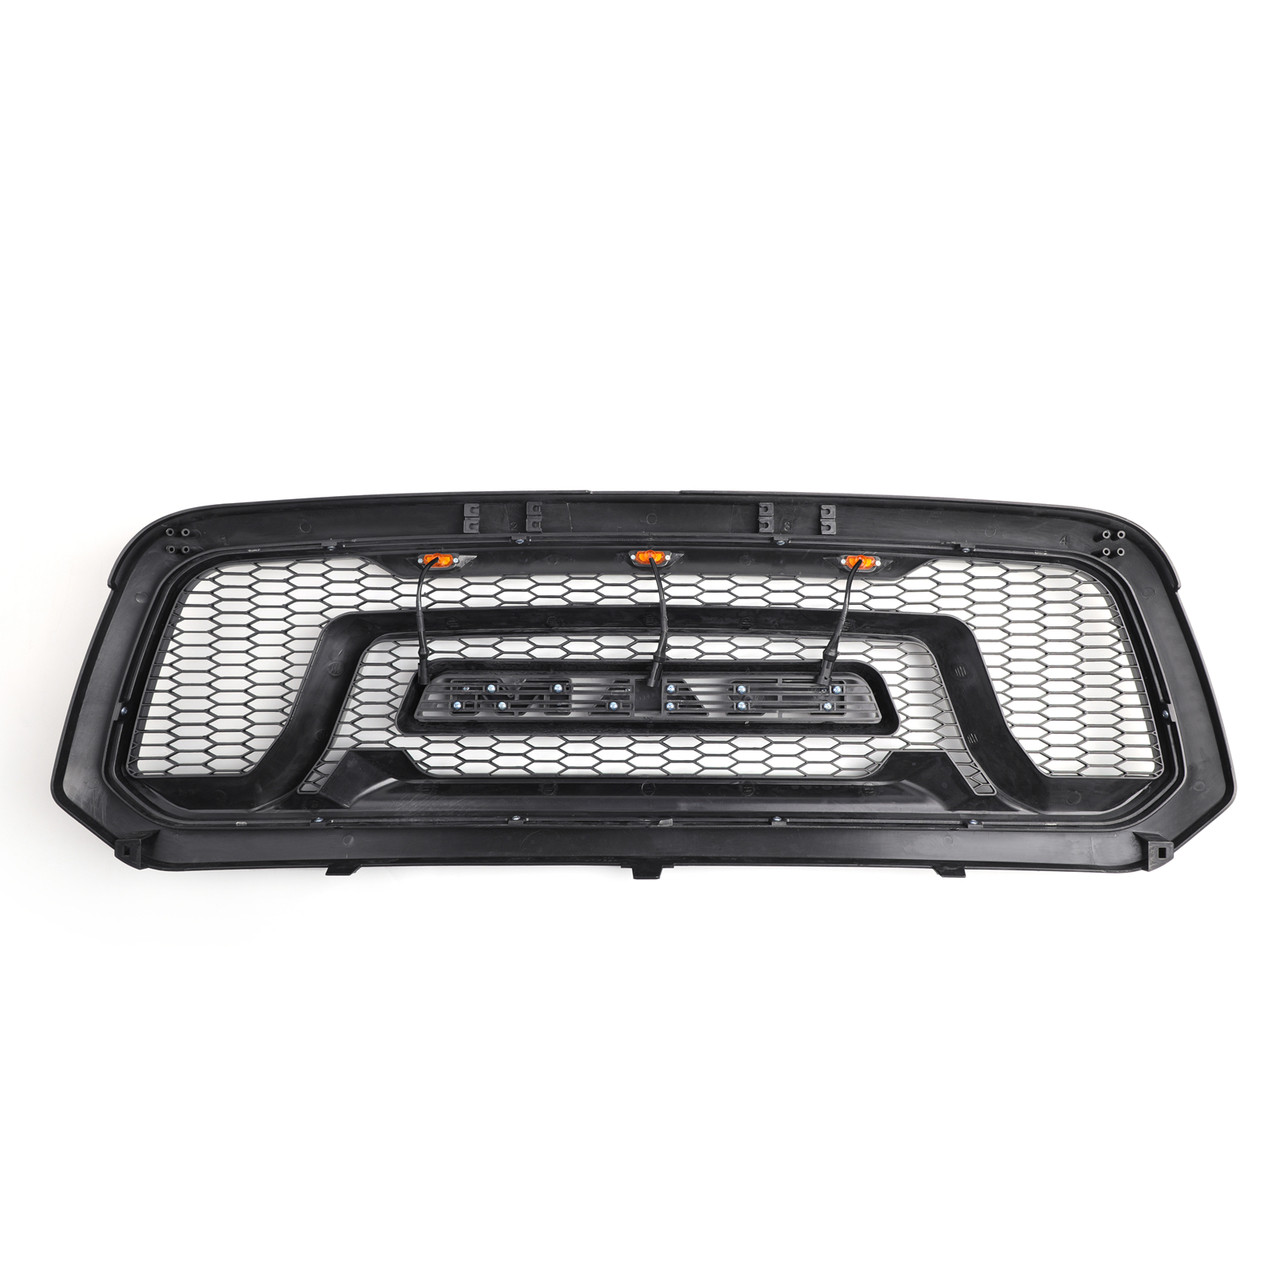 Grille ABS Honeycomb Bumper Grill Mesh Rebel Style For Ram 1500 13-18 Black